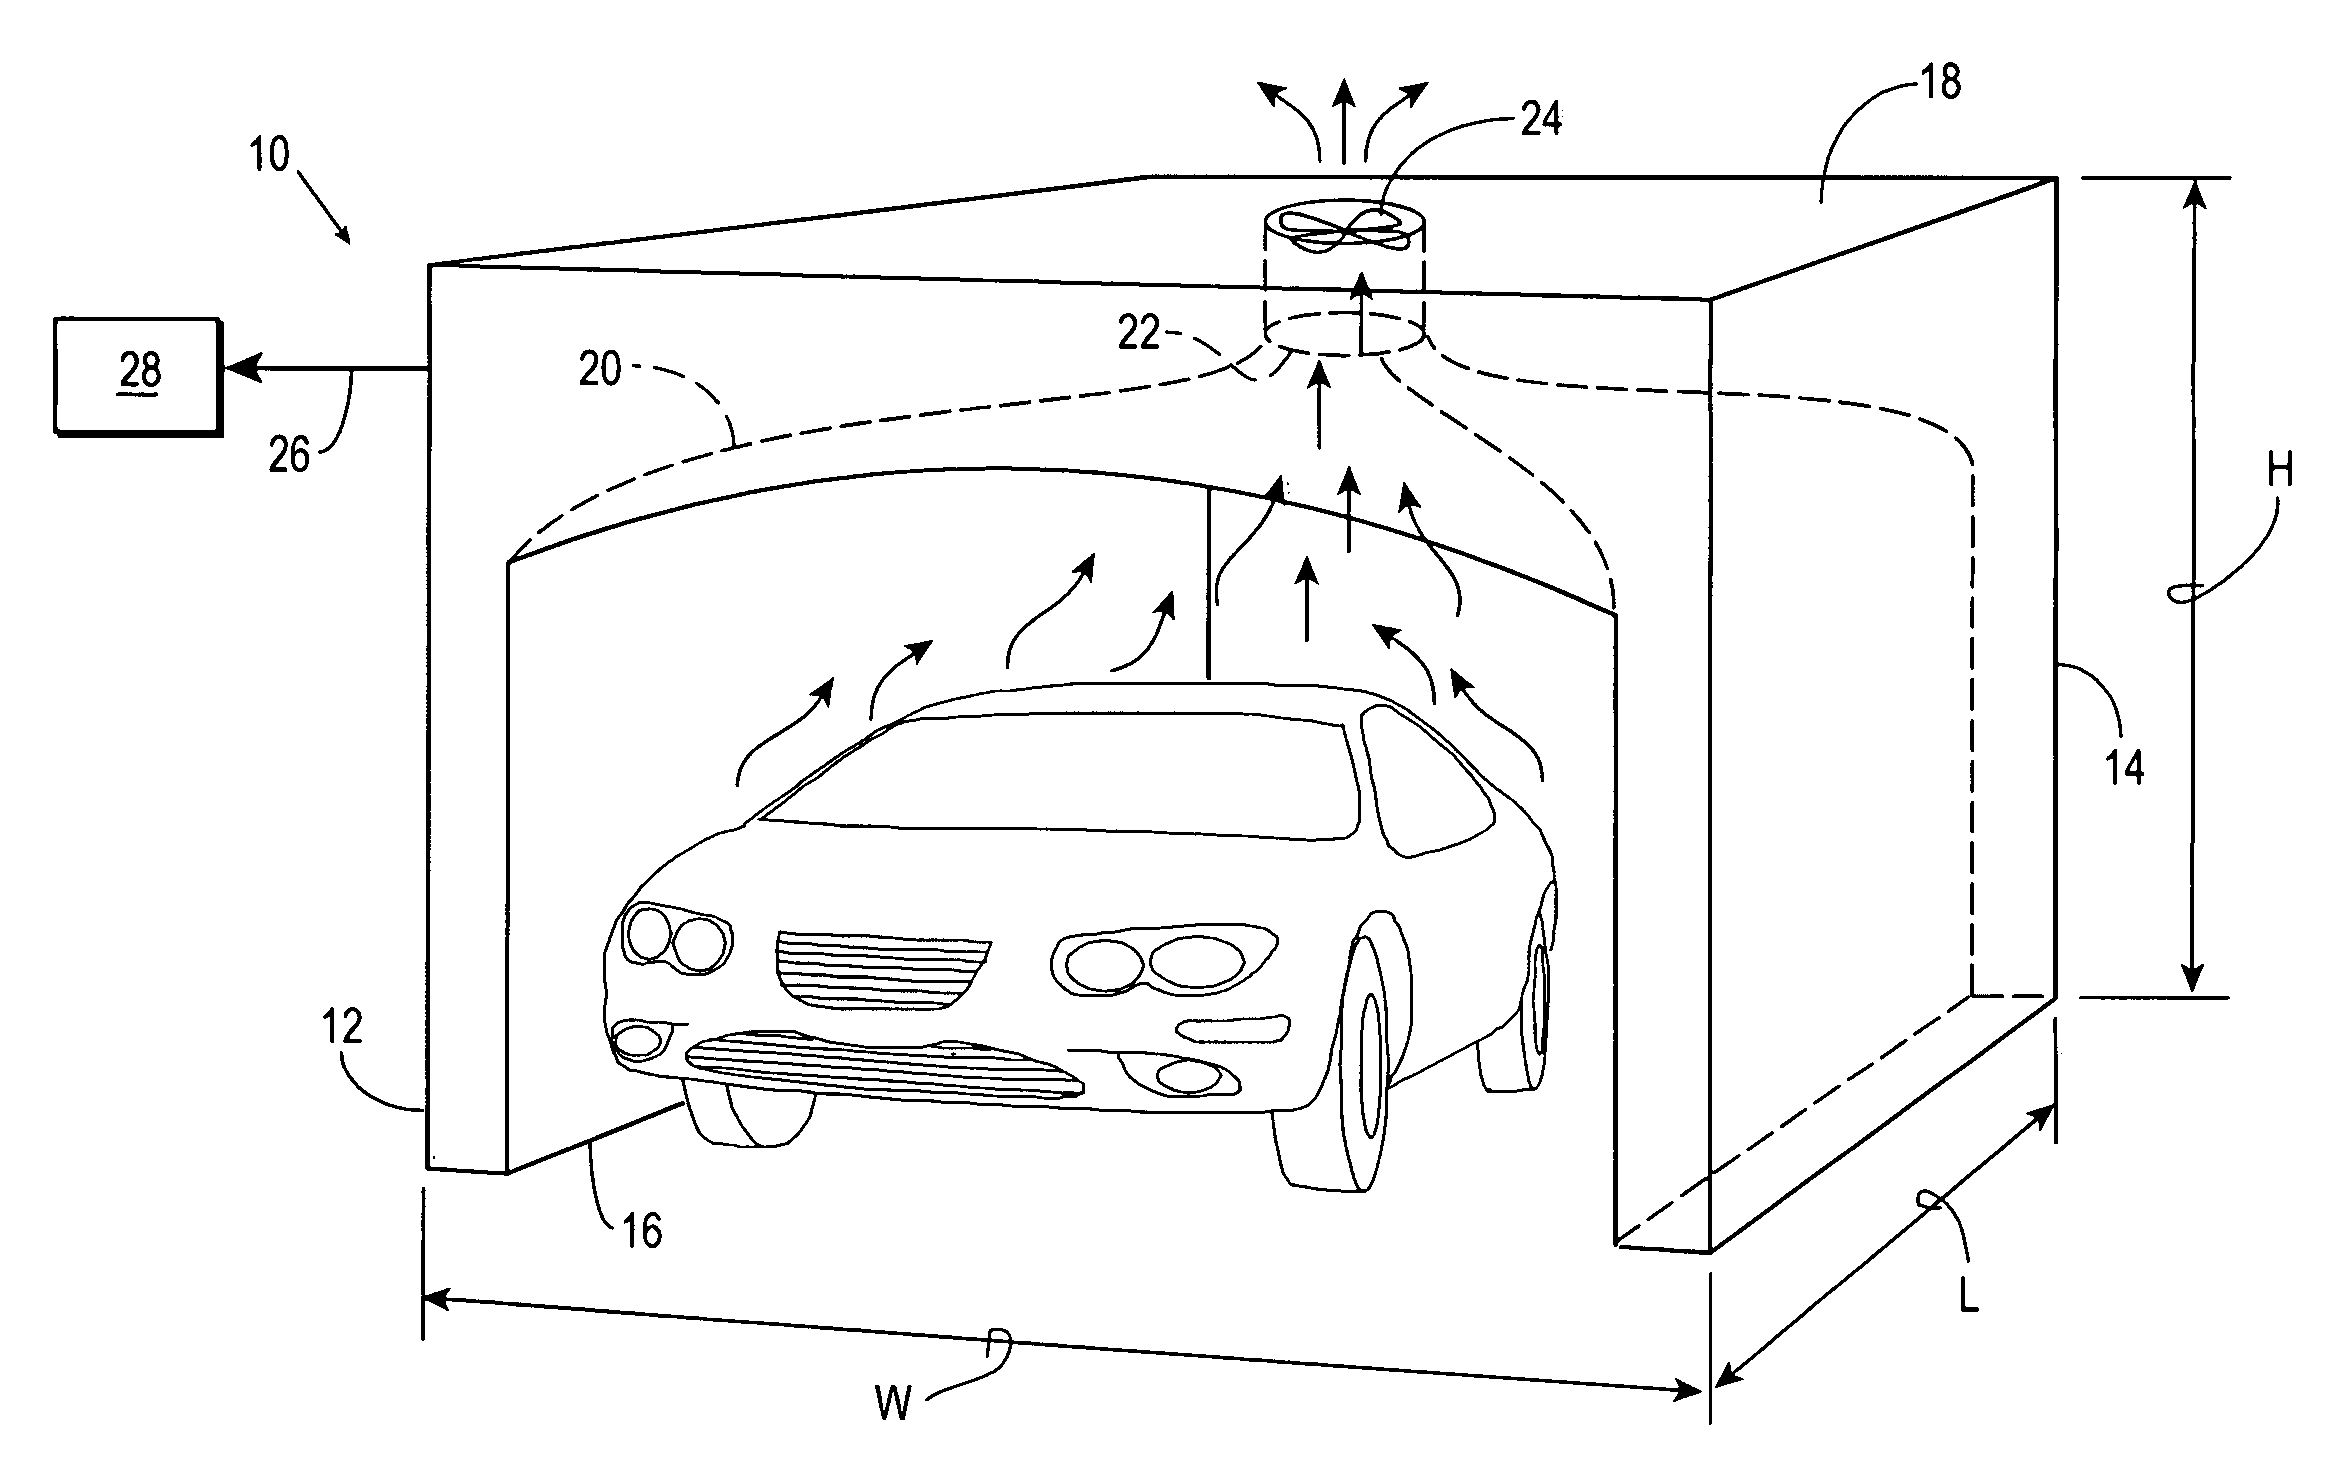 Chemical trace detection portal based on the natural airflow and heat transfer of vehicles